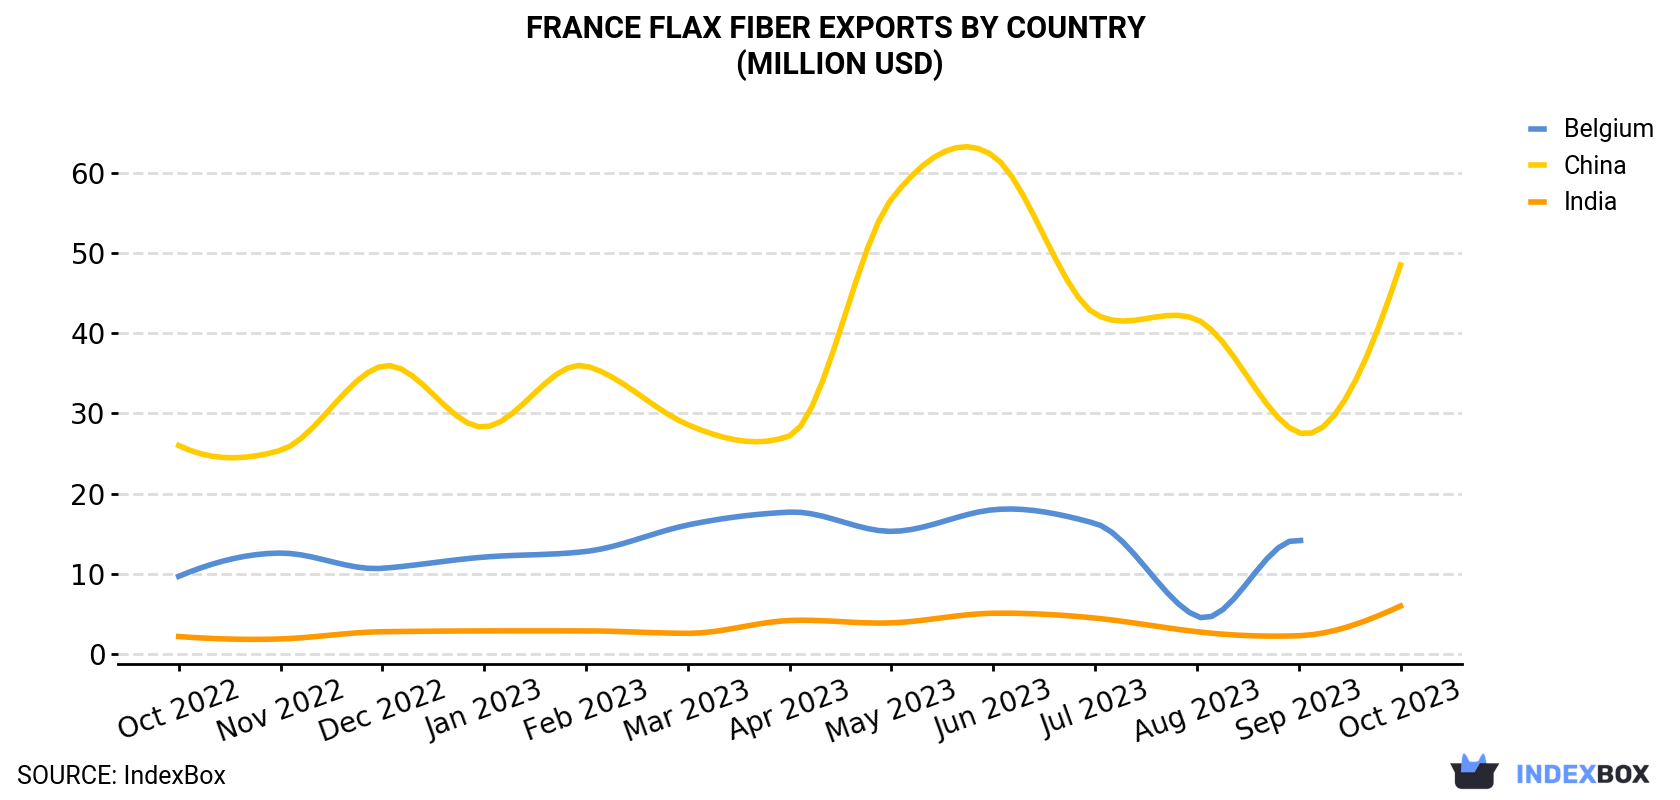 France Flax Fiber Exports By Country (Million USD)